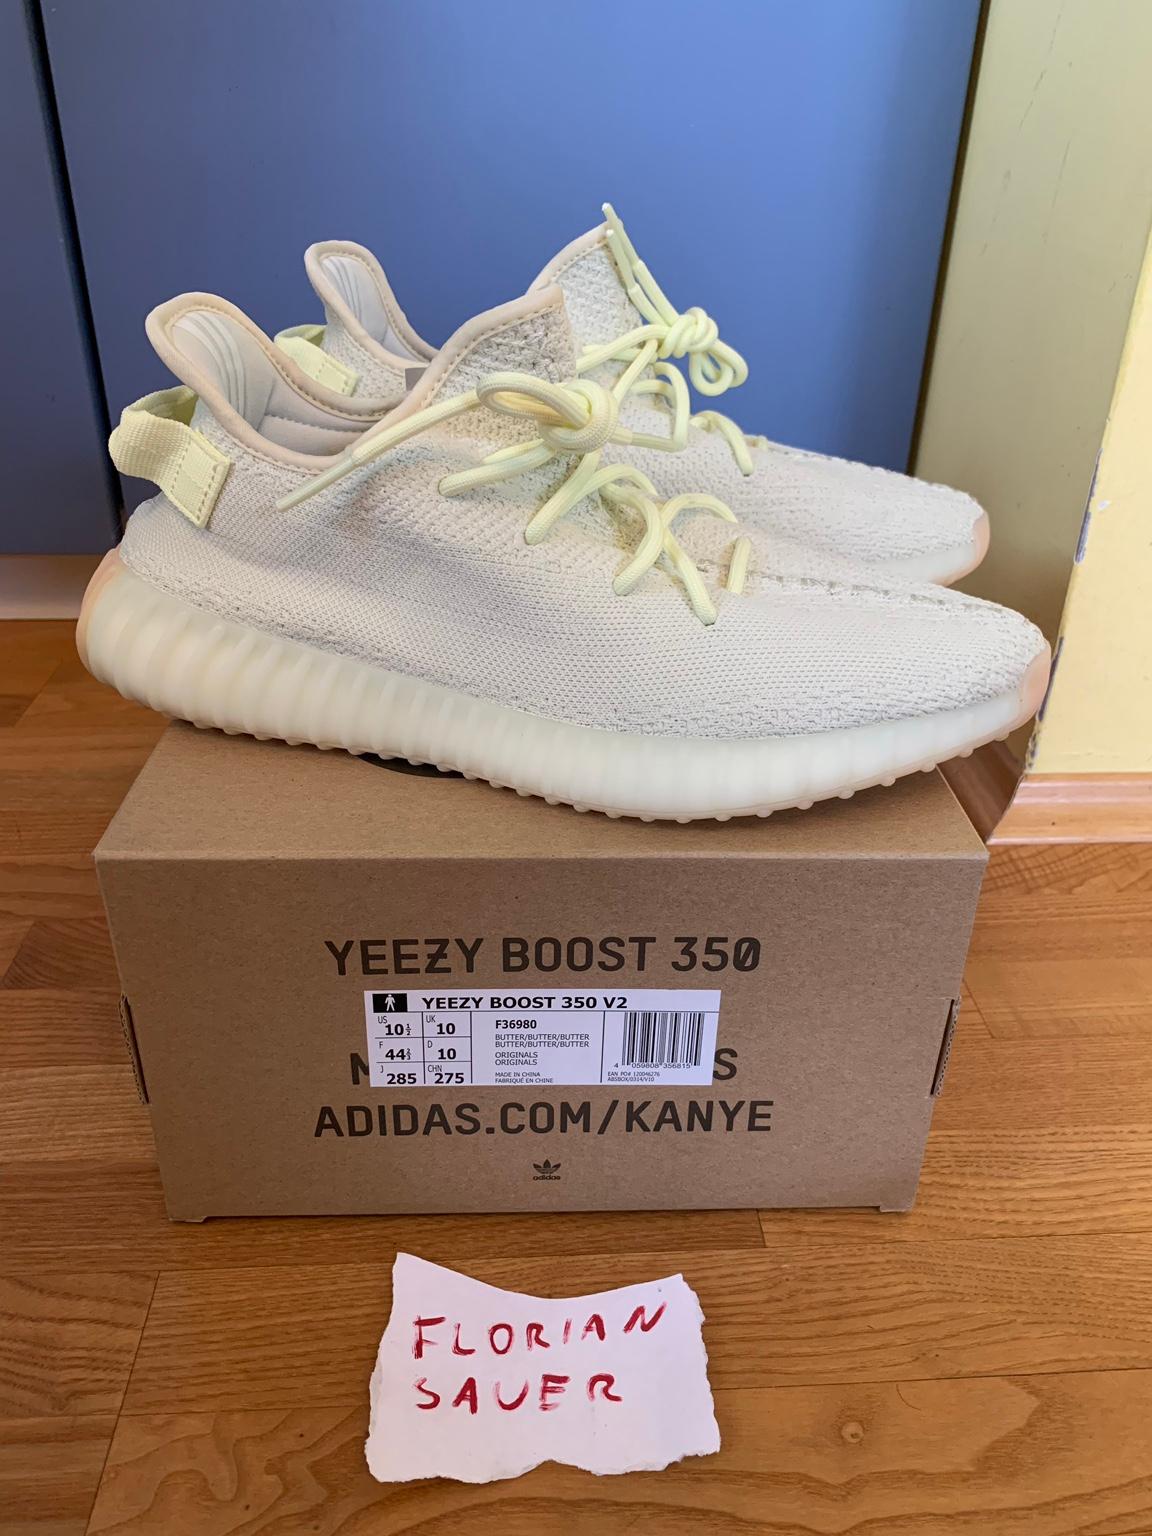 Adidas Yeezy Boost 350 Butter 10.5 in 